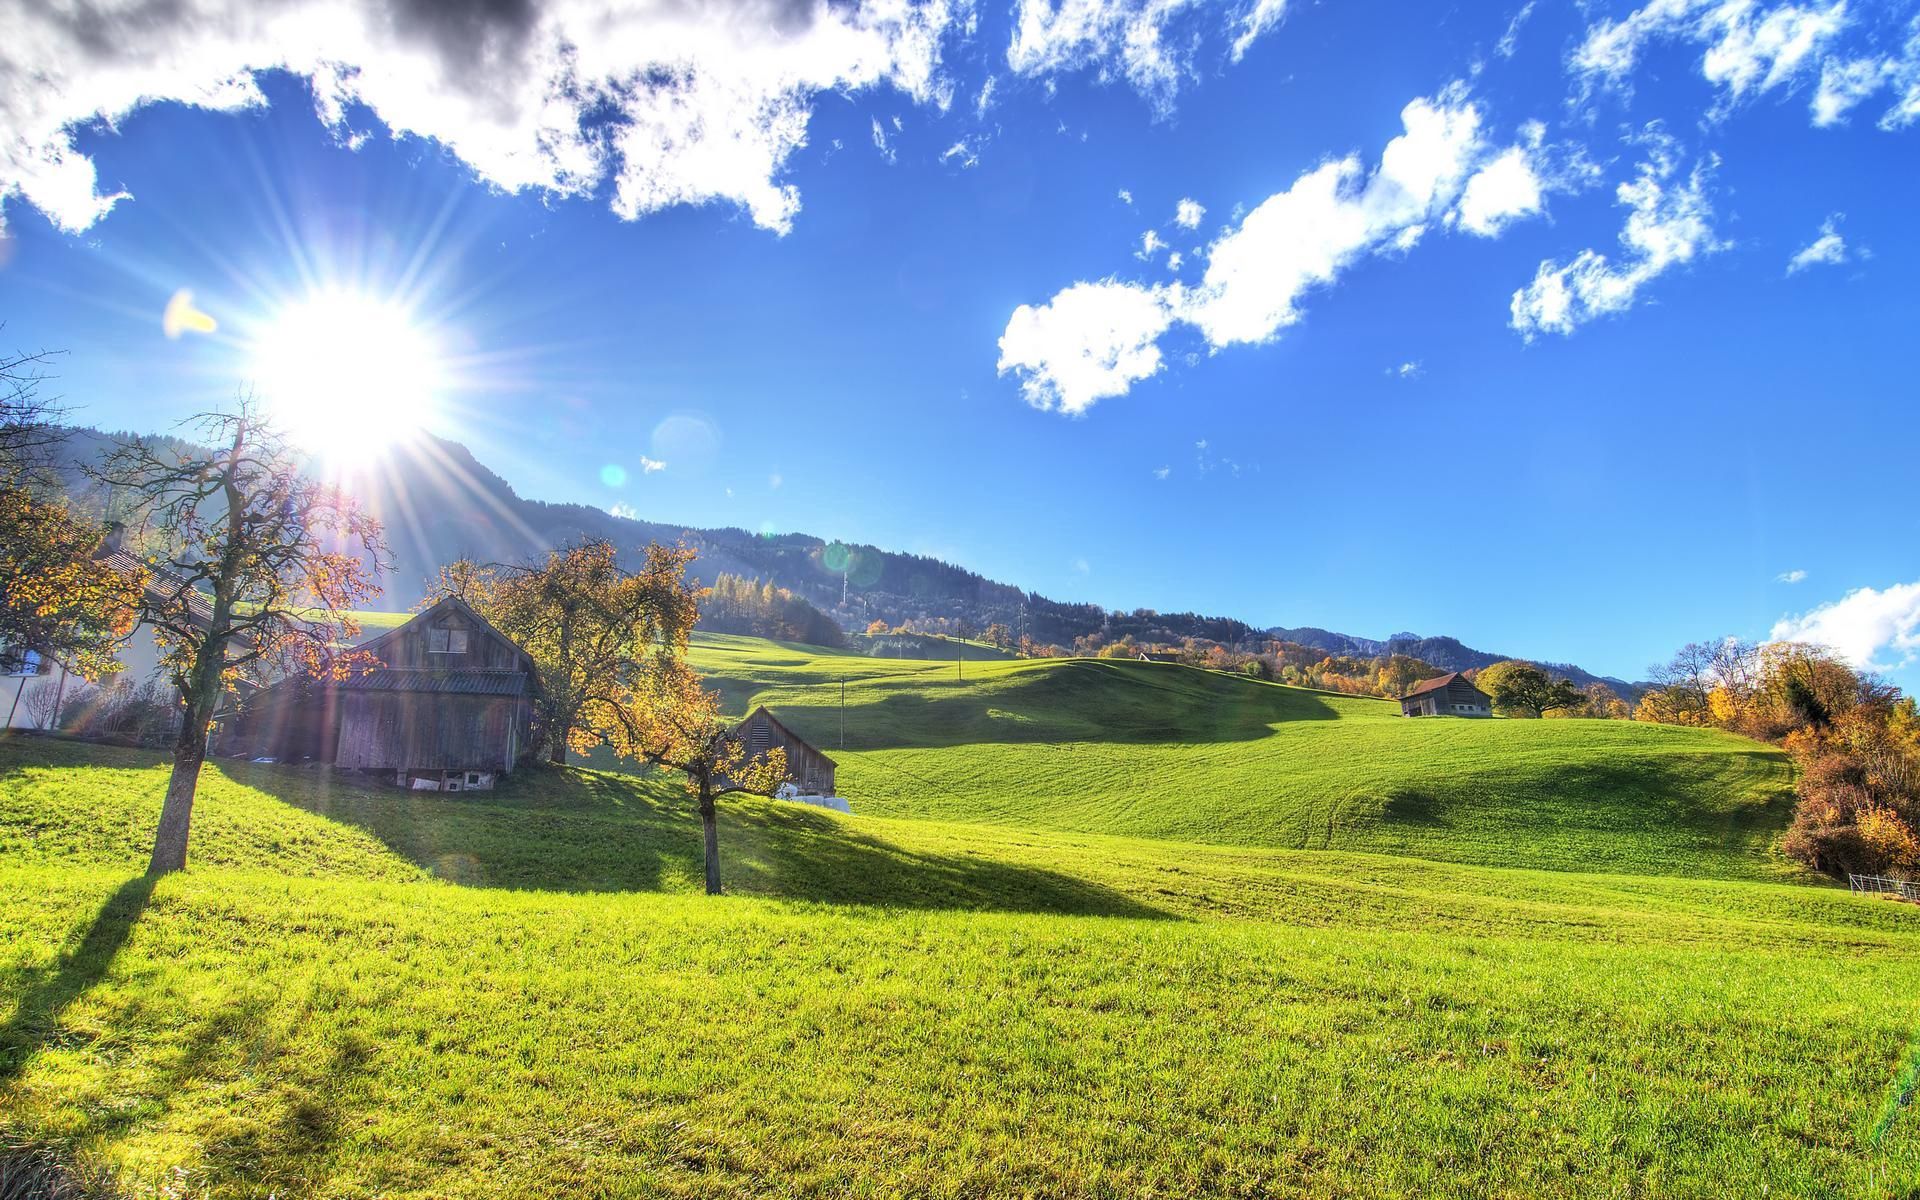 HD wallpaper shine, nature, fields, autumn, sun, light, beams, rays, small house, lodge, lawn, heat, warmth, slopes, lawns, indian summer